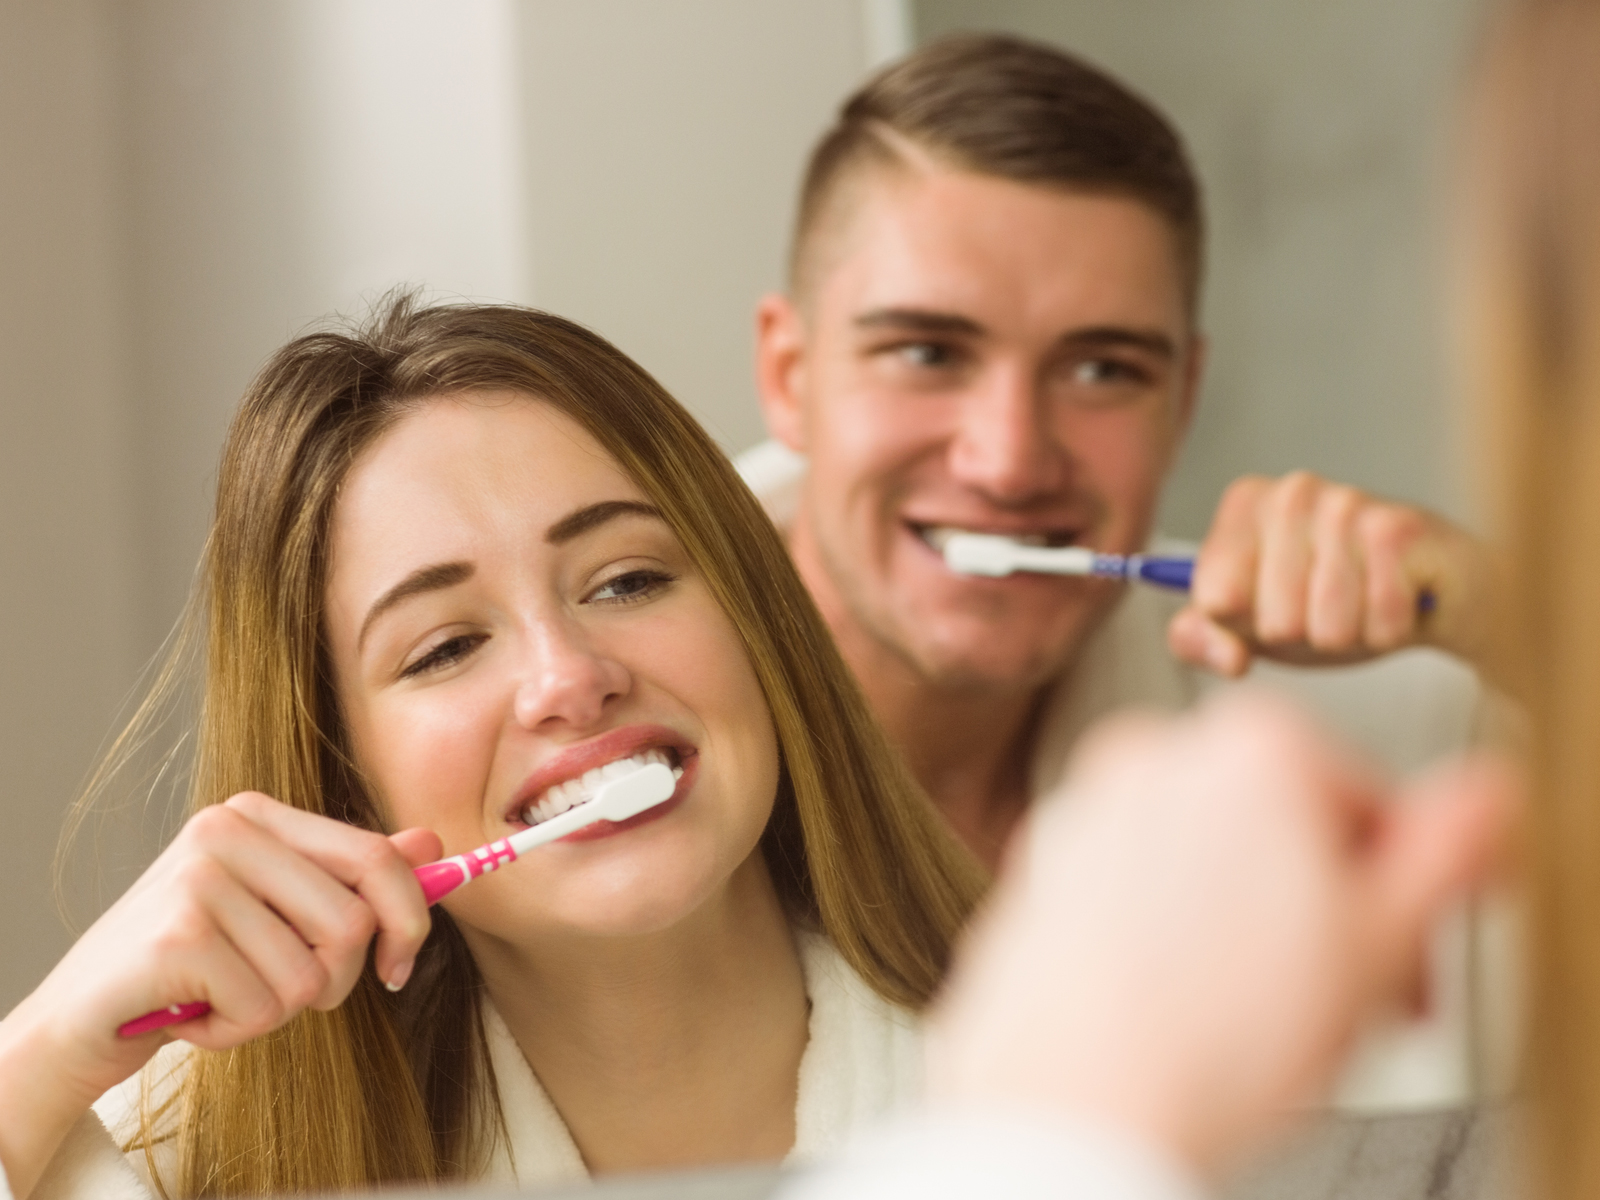 Can You Use Toothpaste To Clean Retainers?